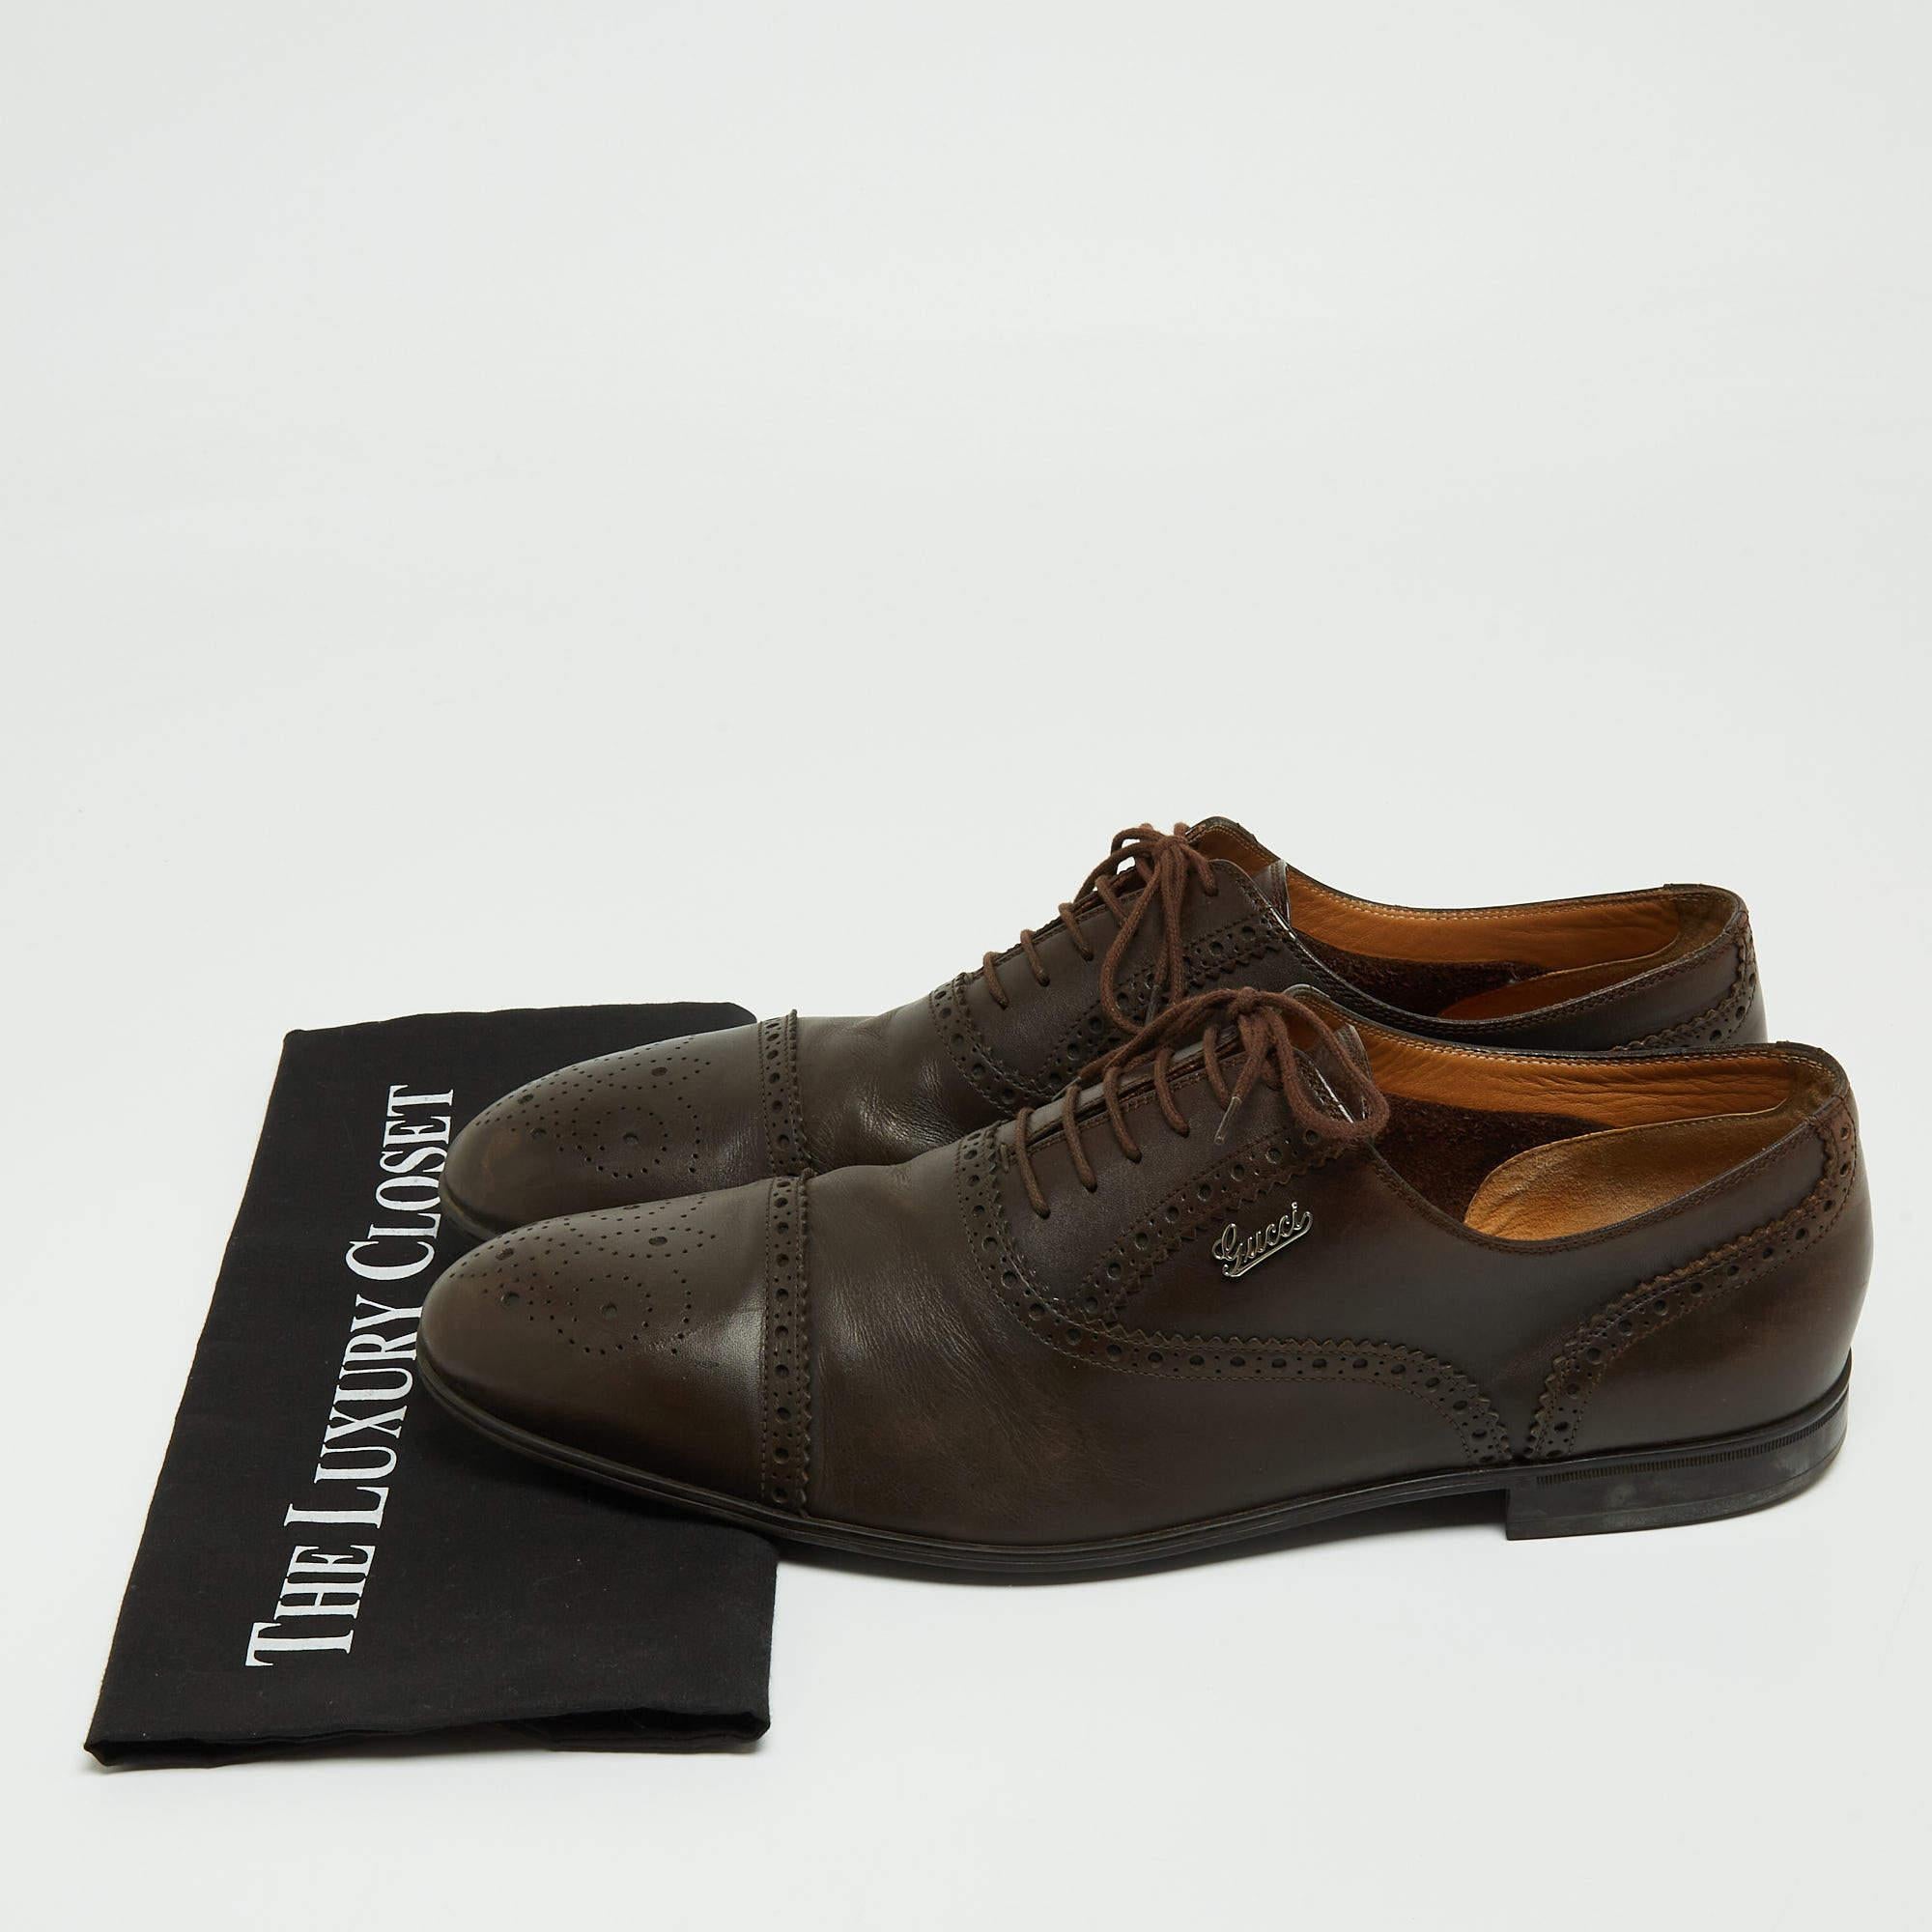 Gucci Brown Leather Brogue Oxfords Size 45.5 For Sale 5